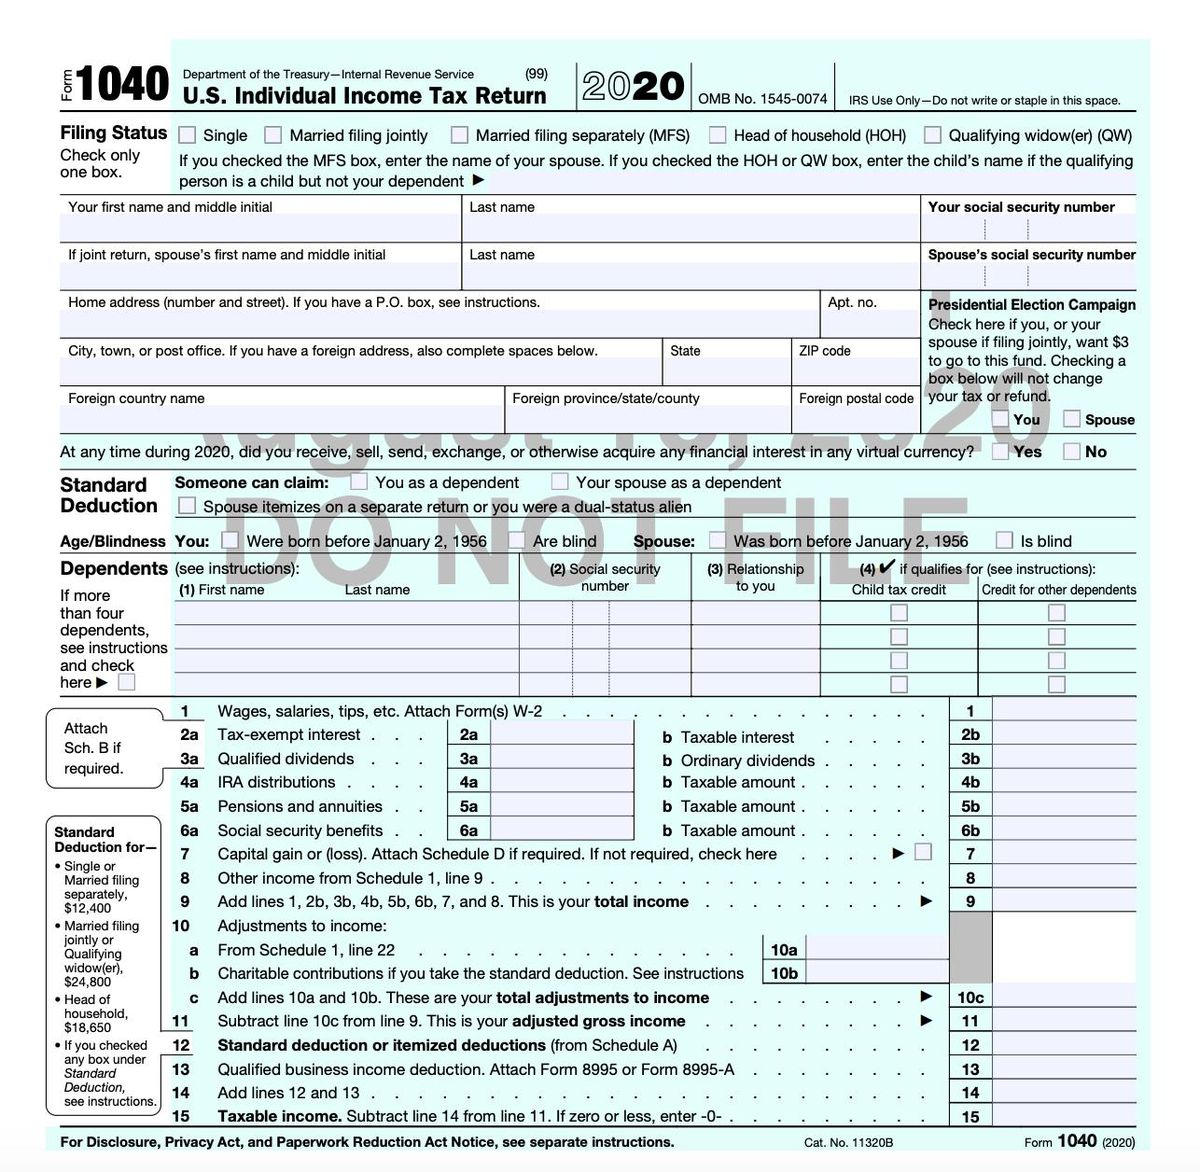 Irs Releases Draft Form 1040: Here'S What'S New For 2020